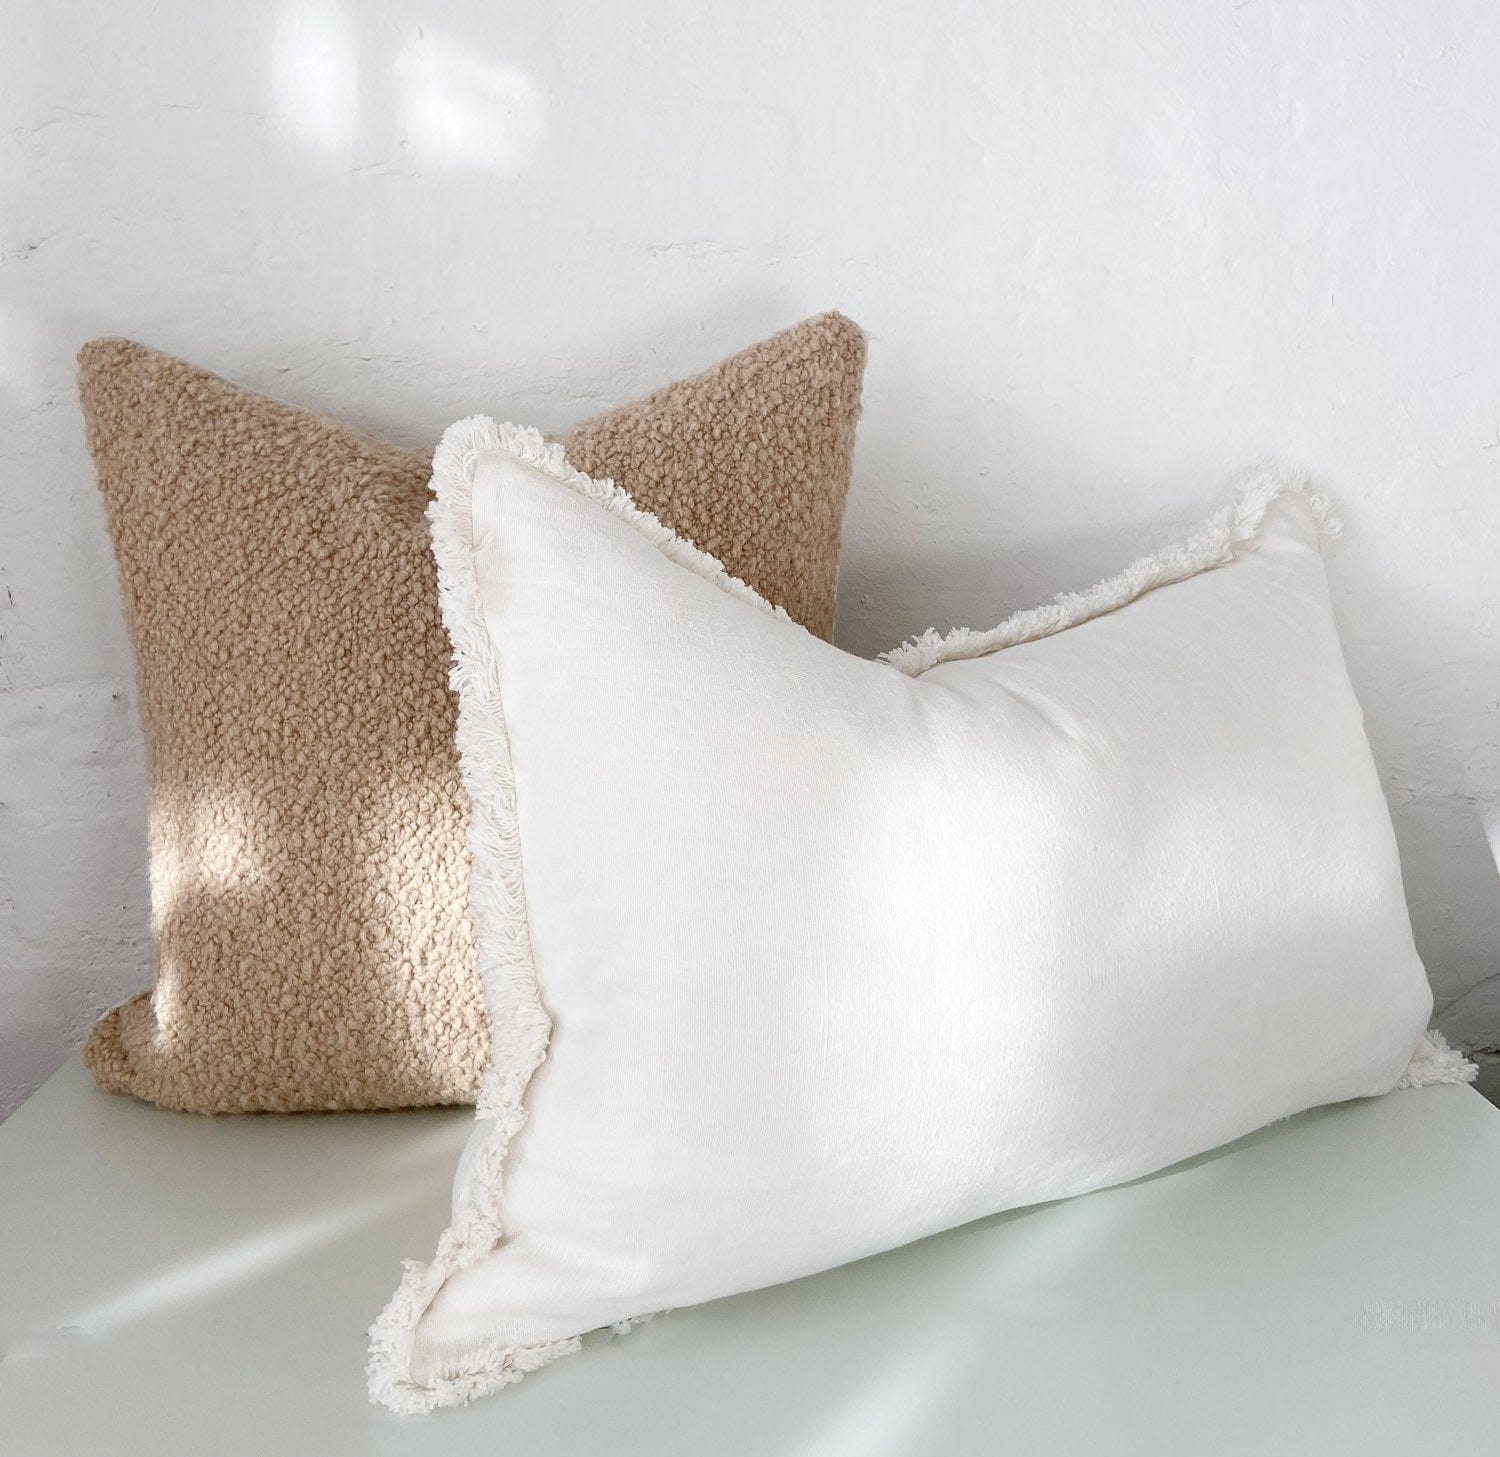 norsu Cushion, Bouclé Buff with White Leather Piping - Norsu Interiors (6582406086844)